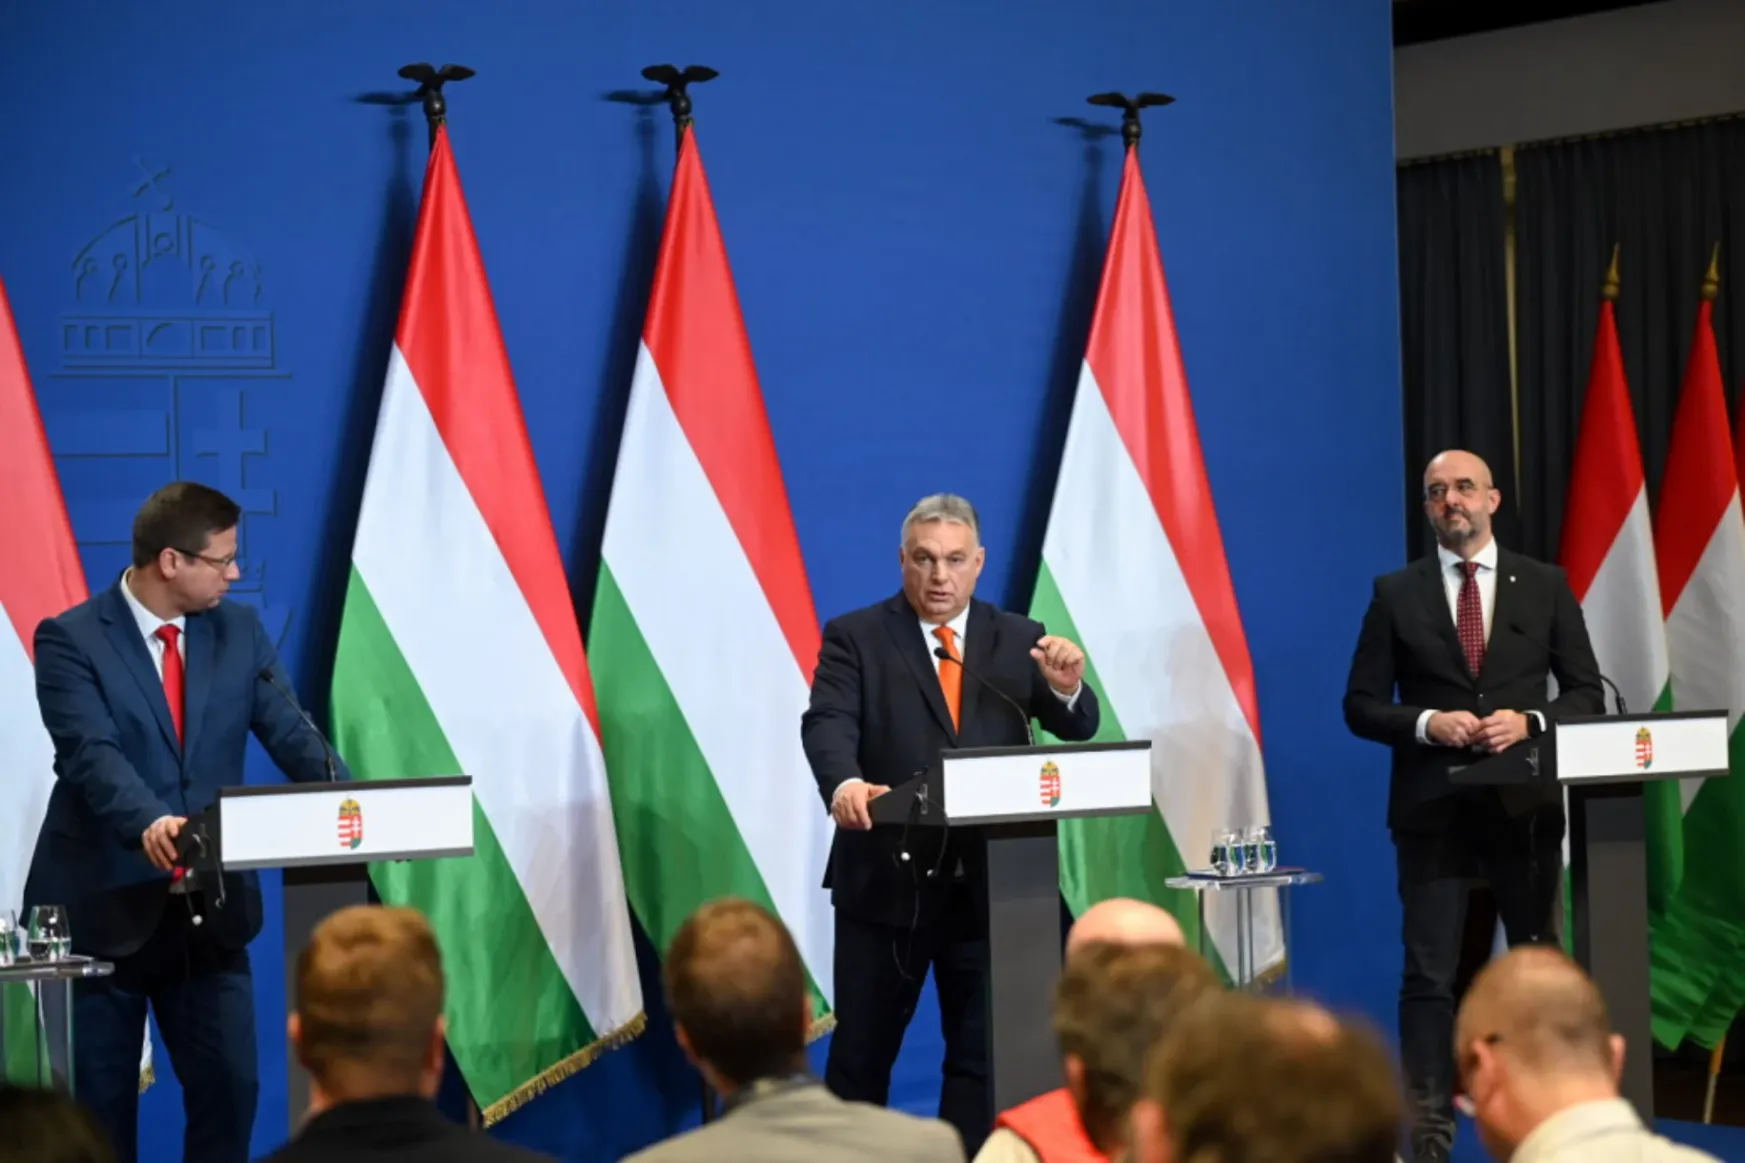 Orbán on 2022: In the end, we were on our own